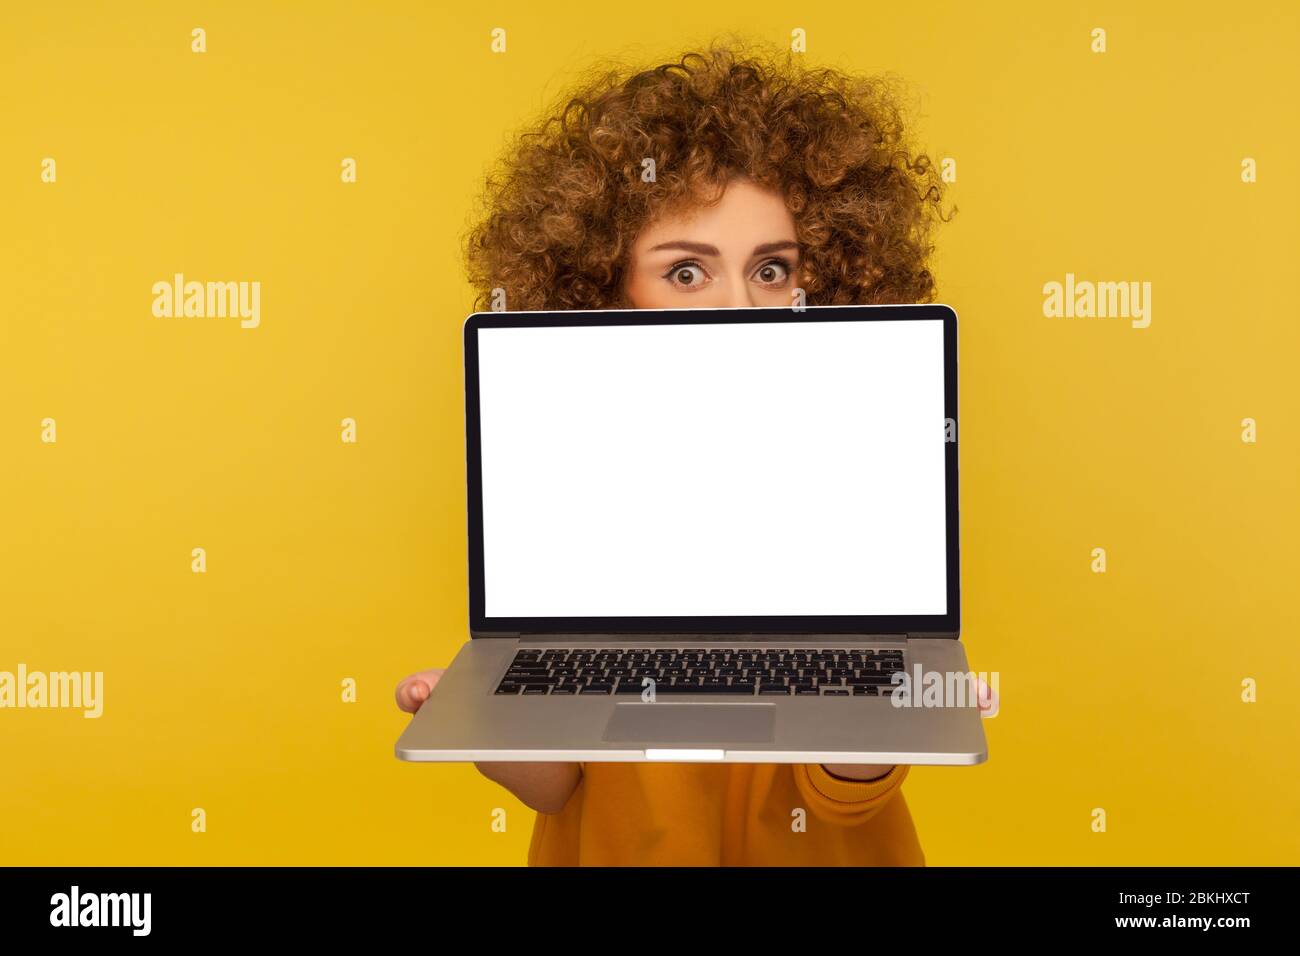 Scared shocked woman with curly hair peeking from behind laptop blank screen with frightened worry eyes, mock up display for cybersecurity advertiseme Stock Photo